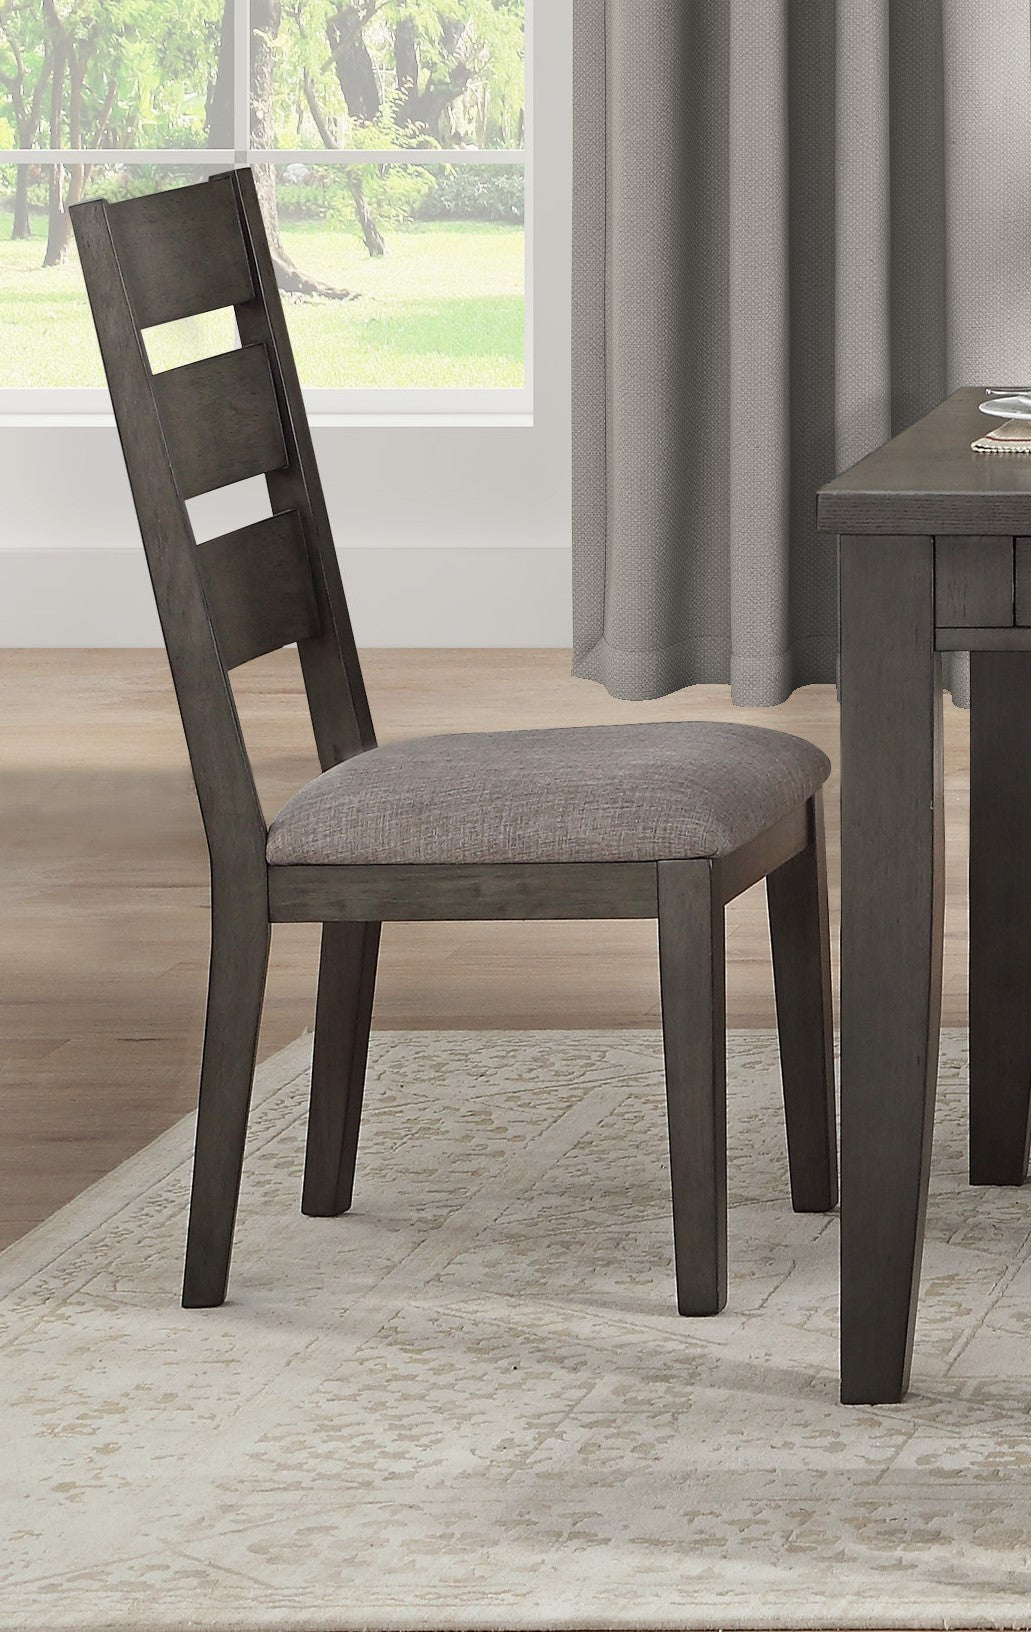 Baresford 6 Piece Dining Table Set